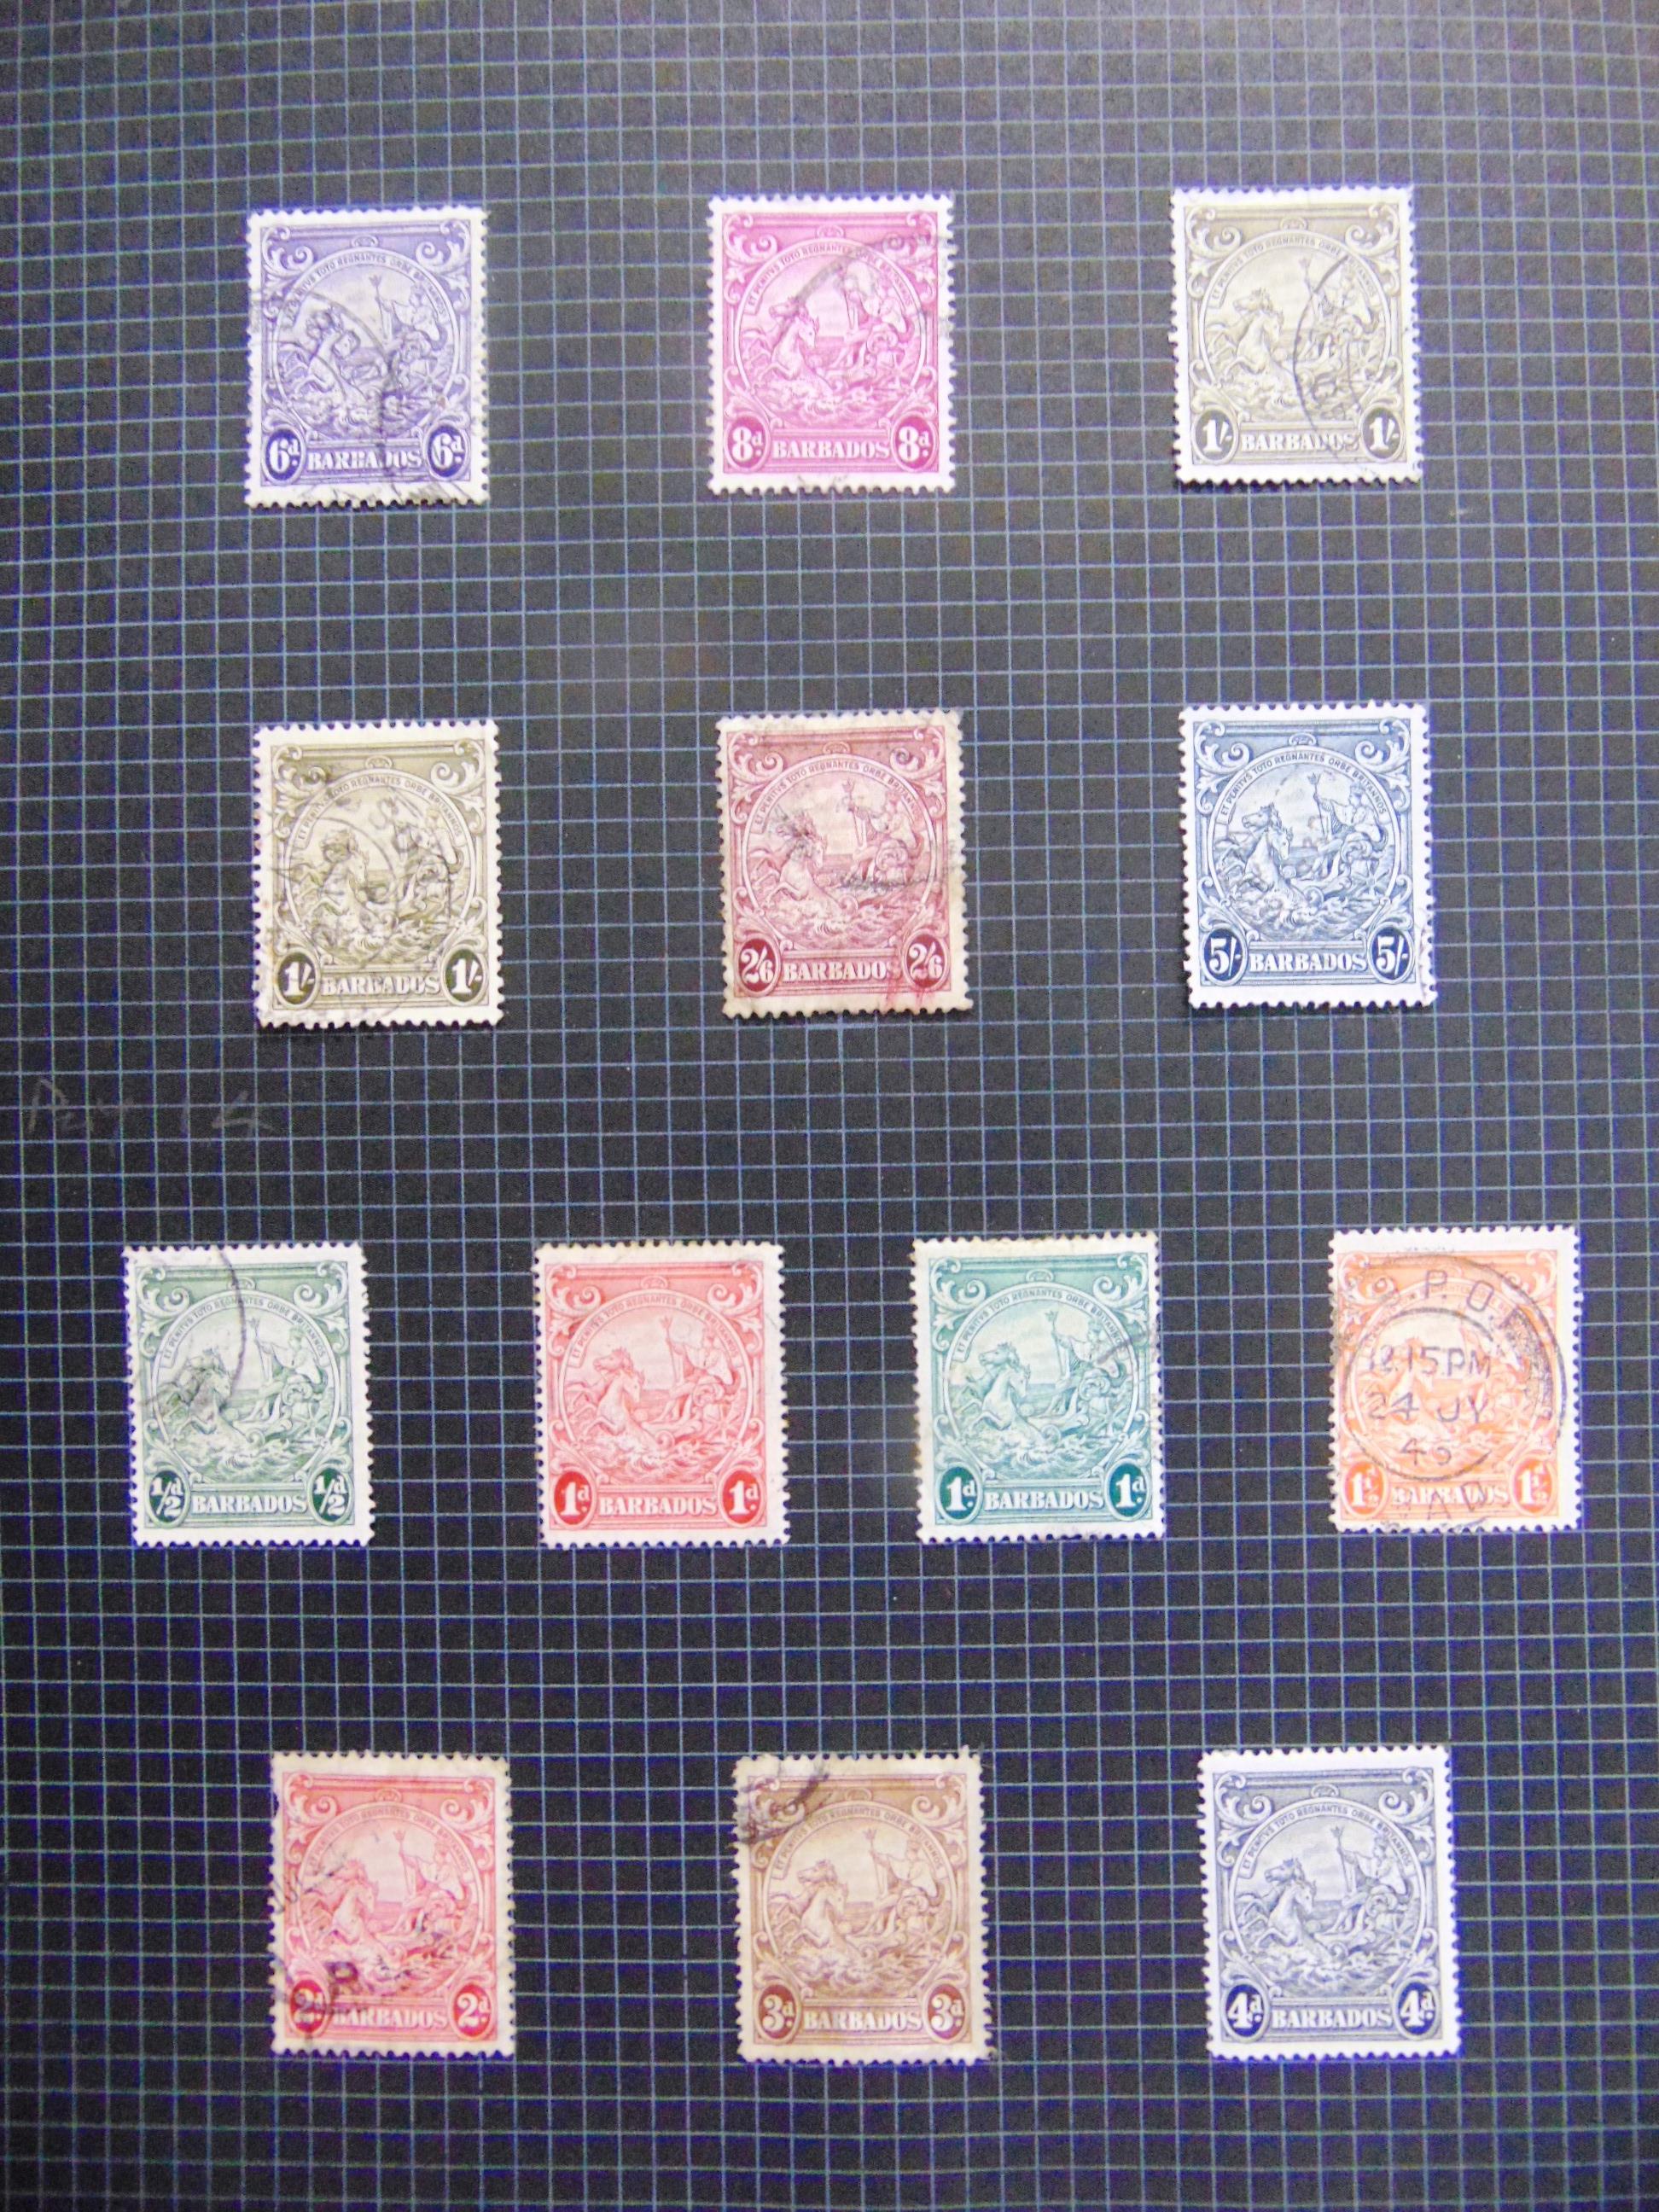 STAMPS - A BRITISH COMMONWEALTH COLLECTION Geo. VI - Eliz. II, mint and used, (three albums). - Image 3 of 4